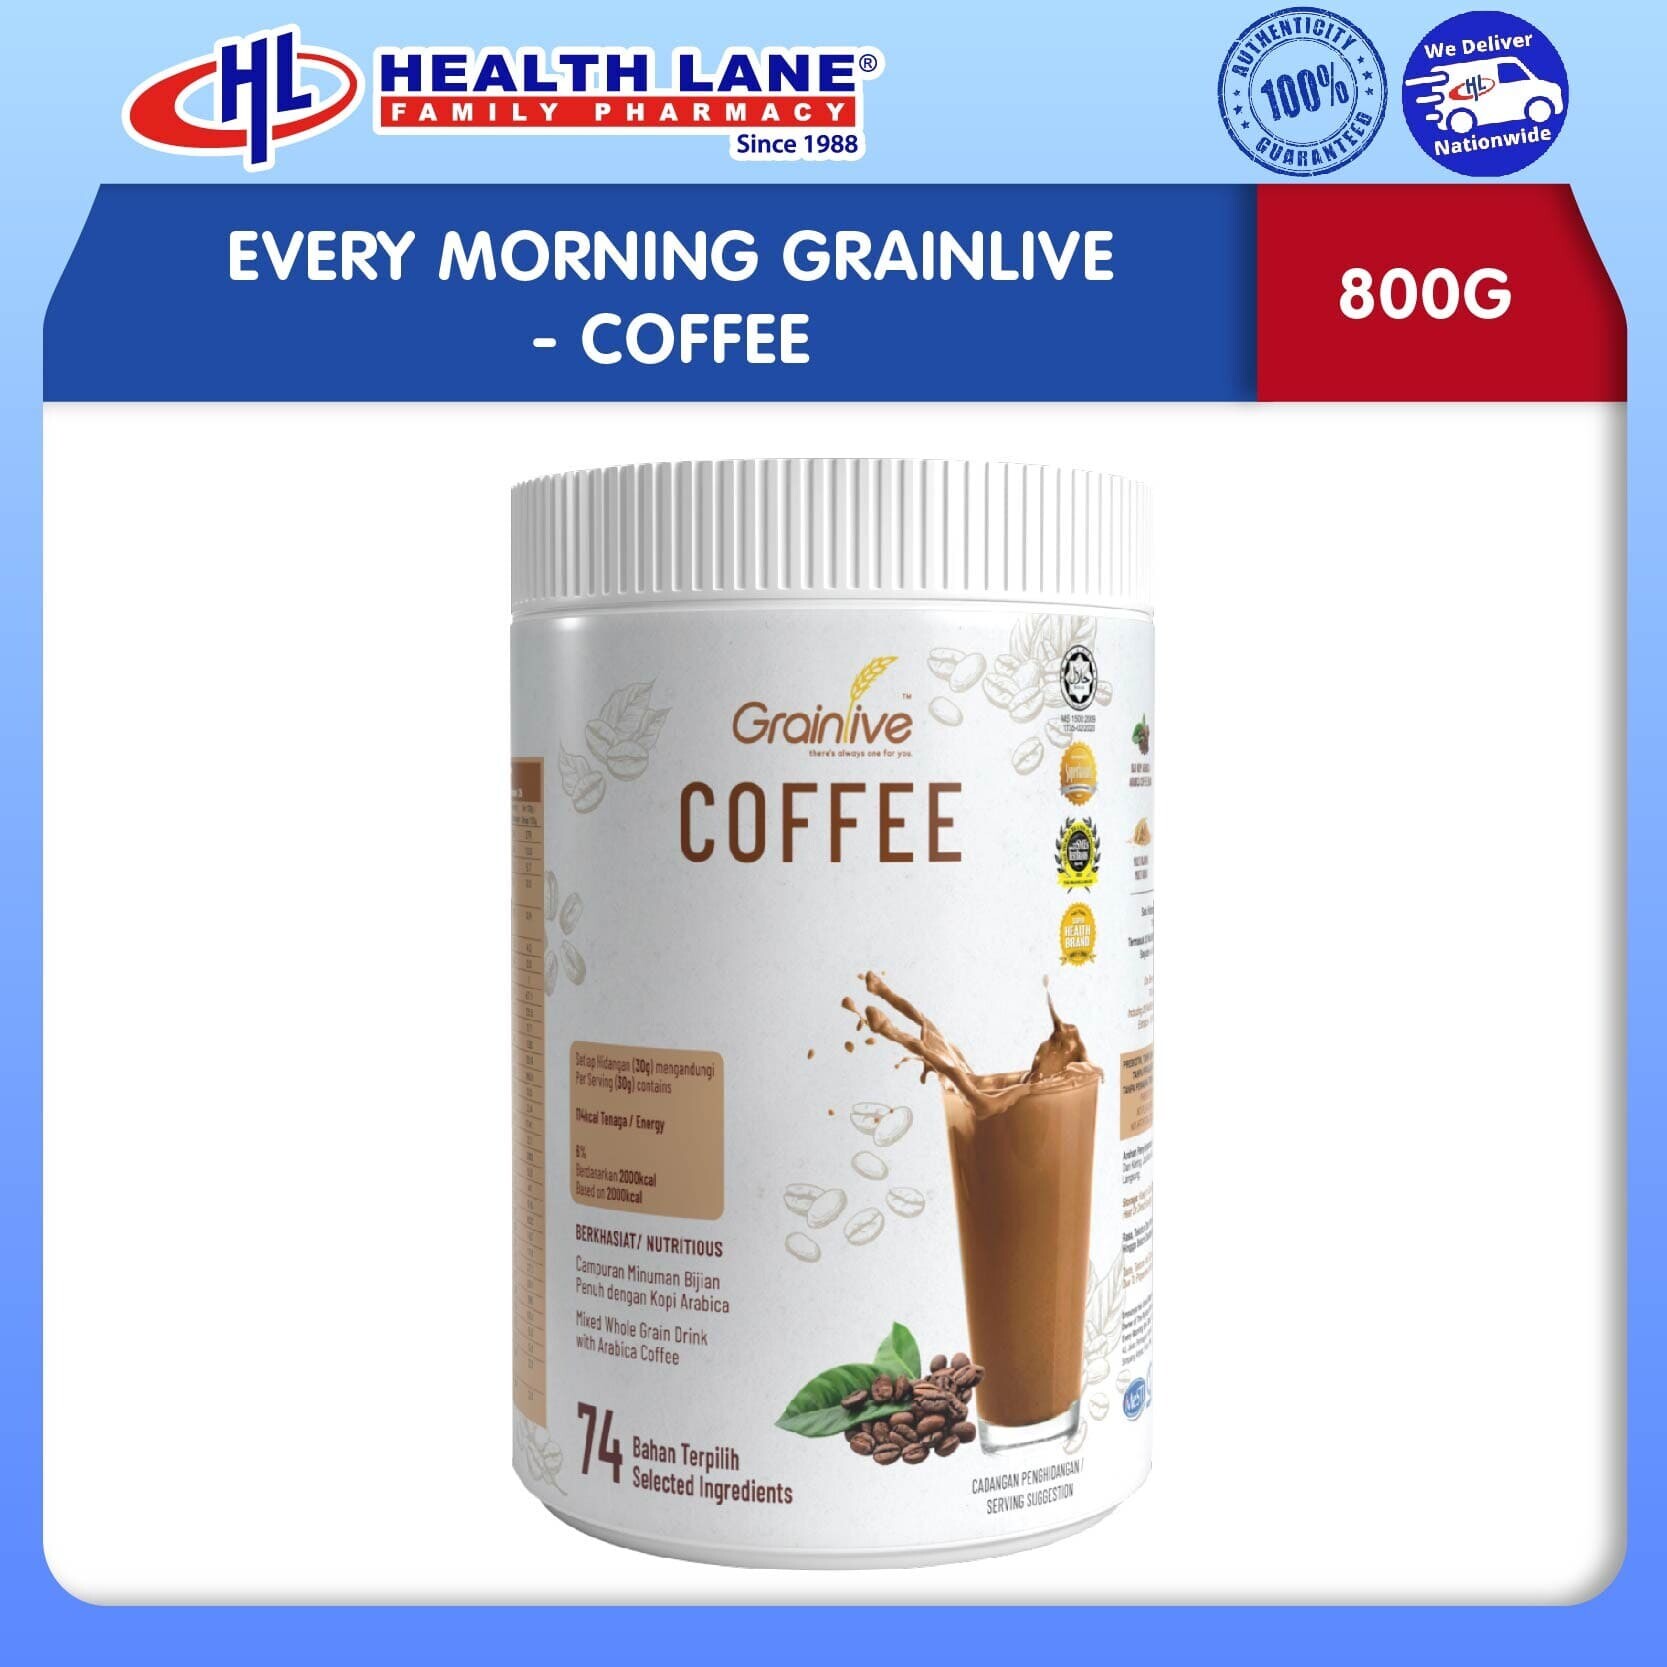 EVERY MORNING GRAINLIVE - COFFEE (800G)